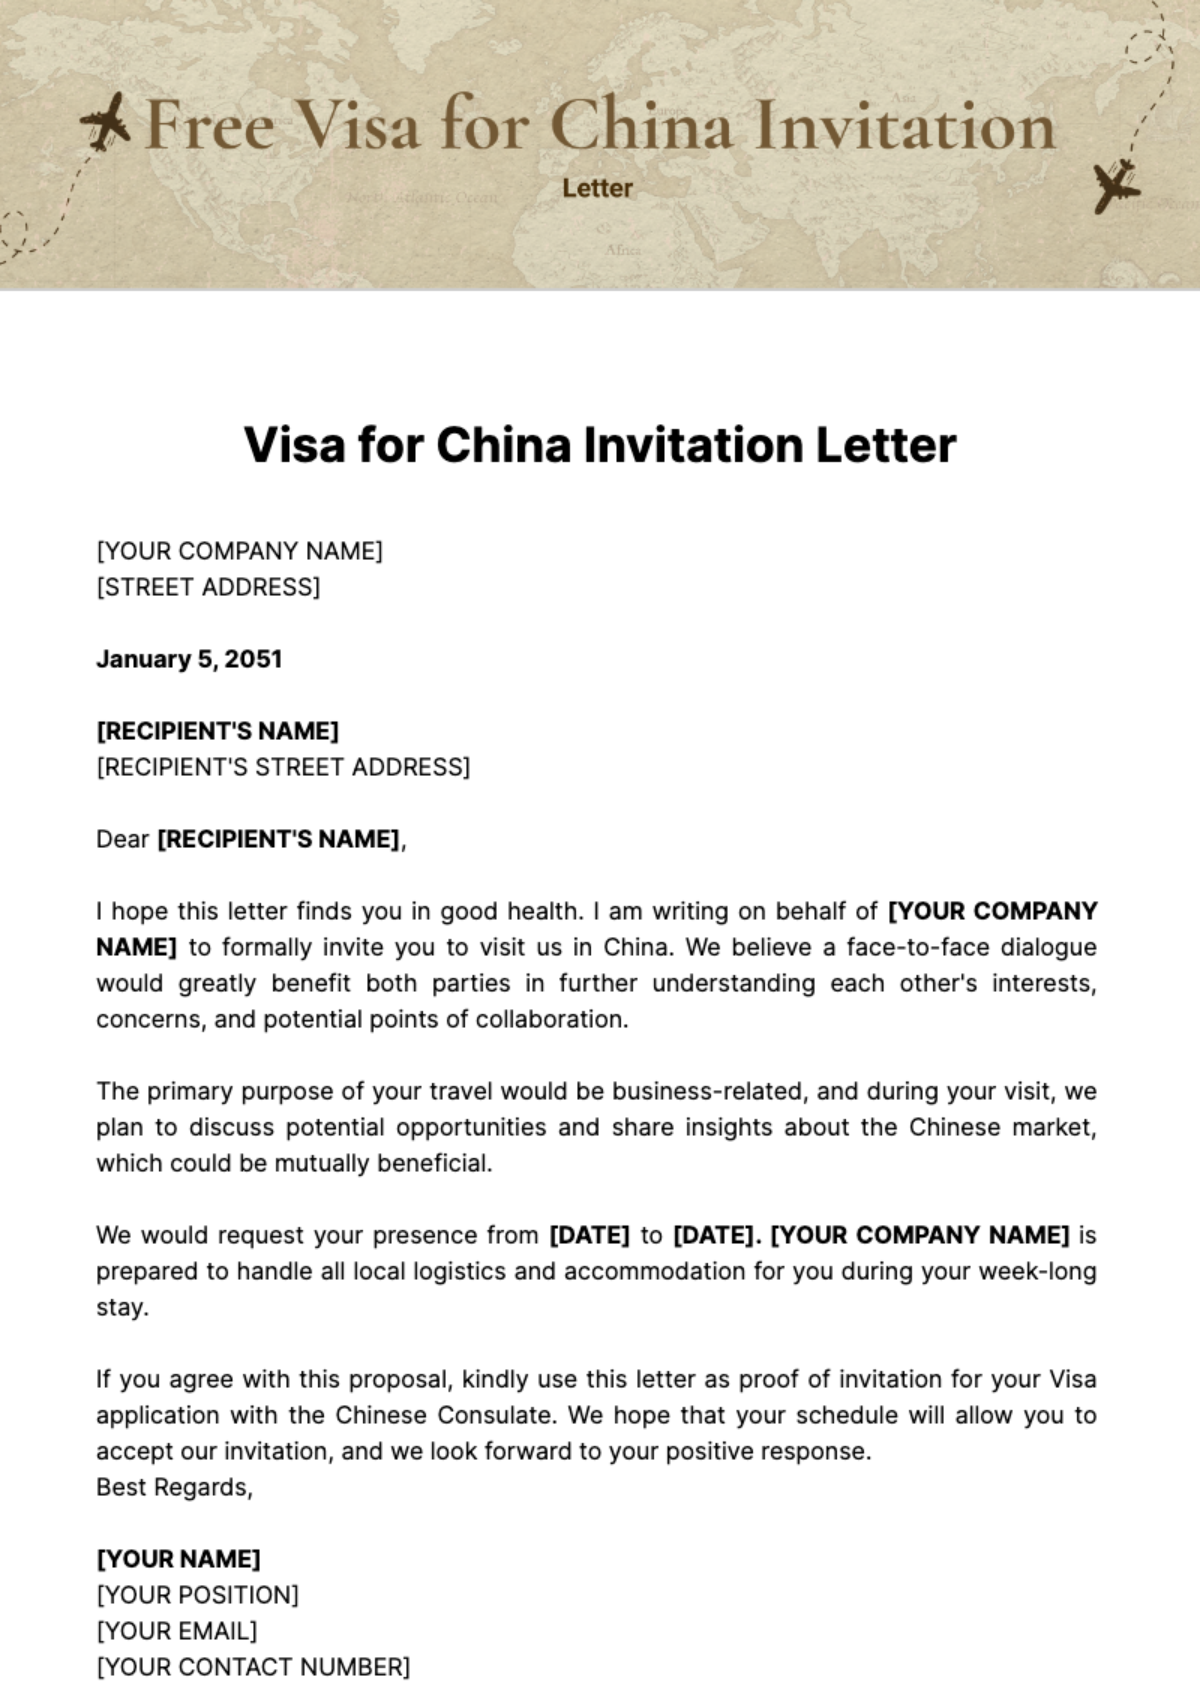 Free Visa for China Invitation Letter Template